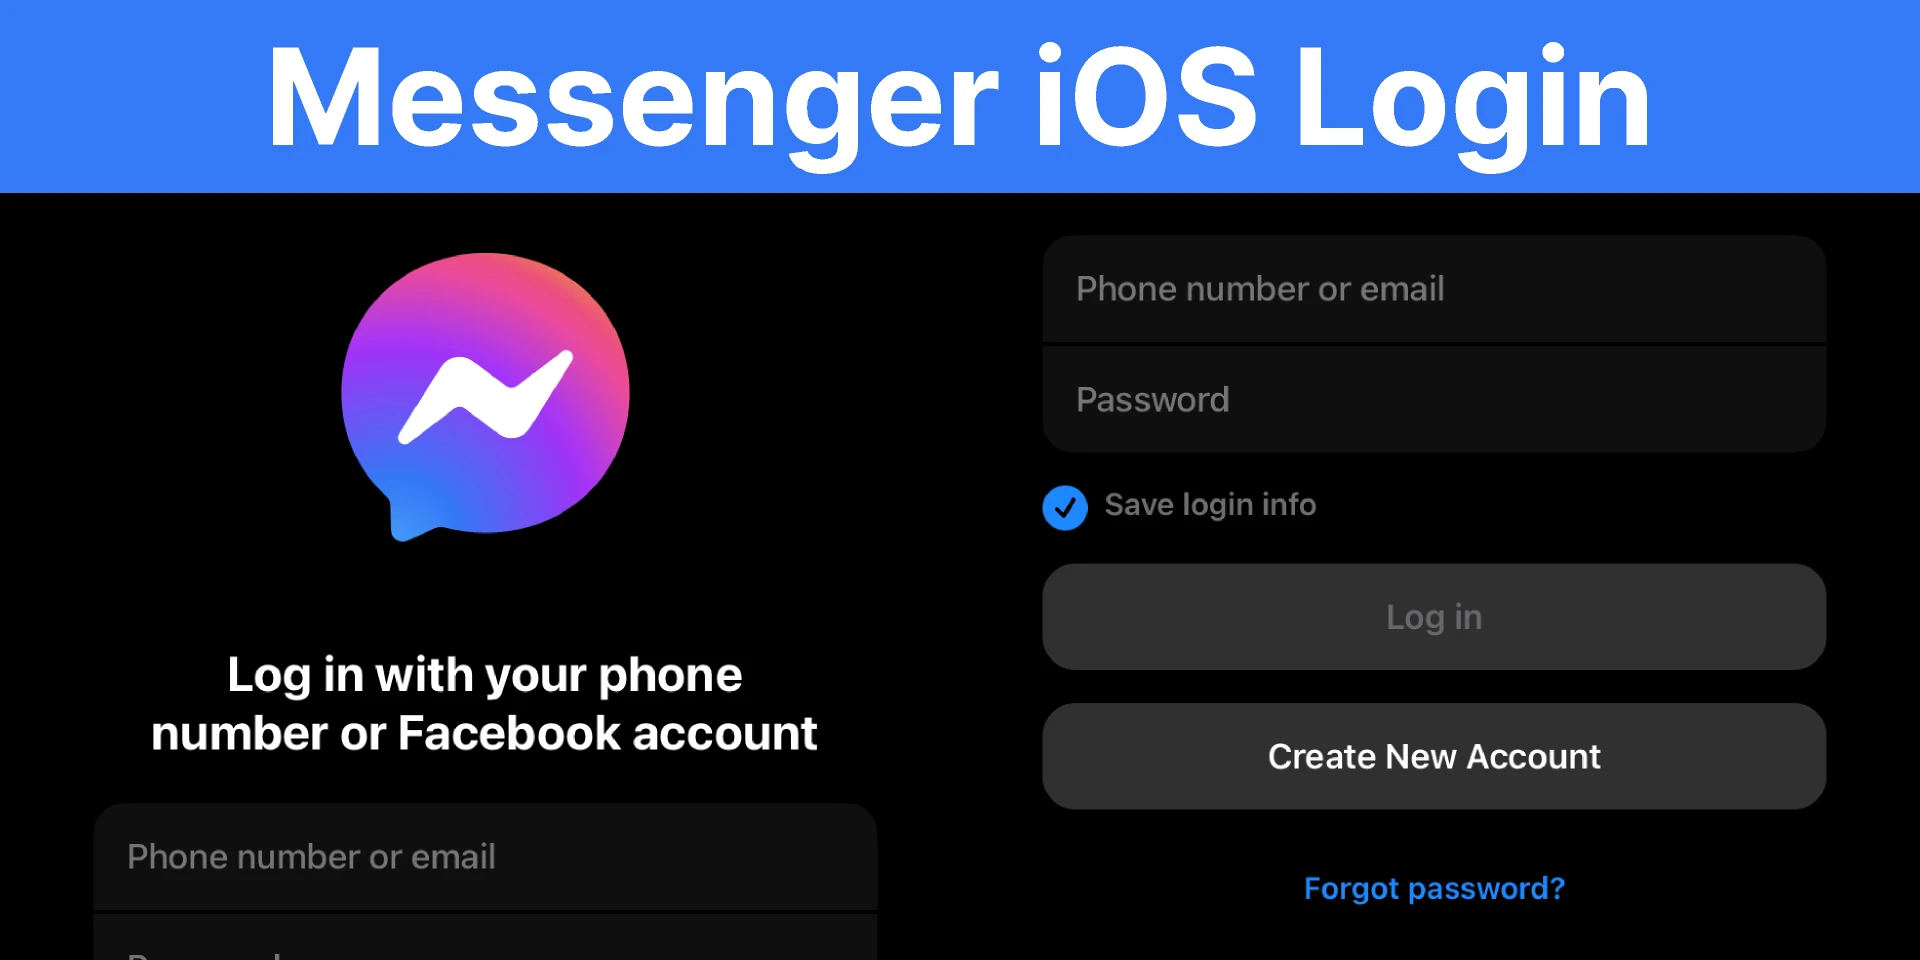 Messenger Log In Screen for Figma and Adobe XD